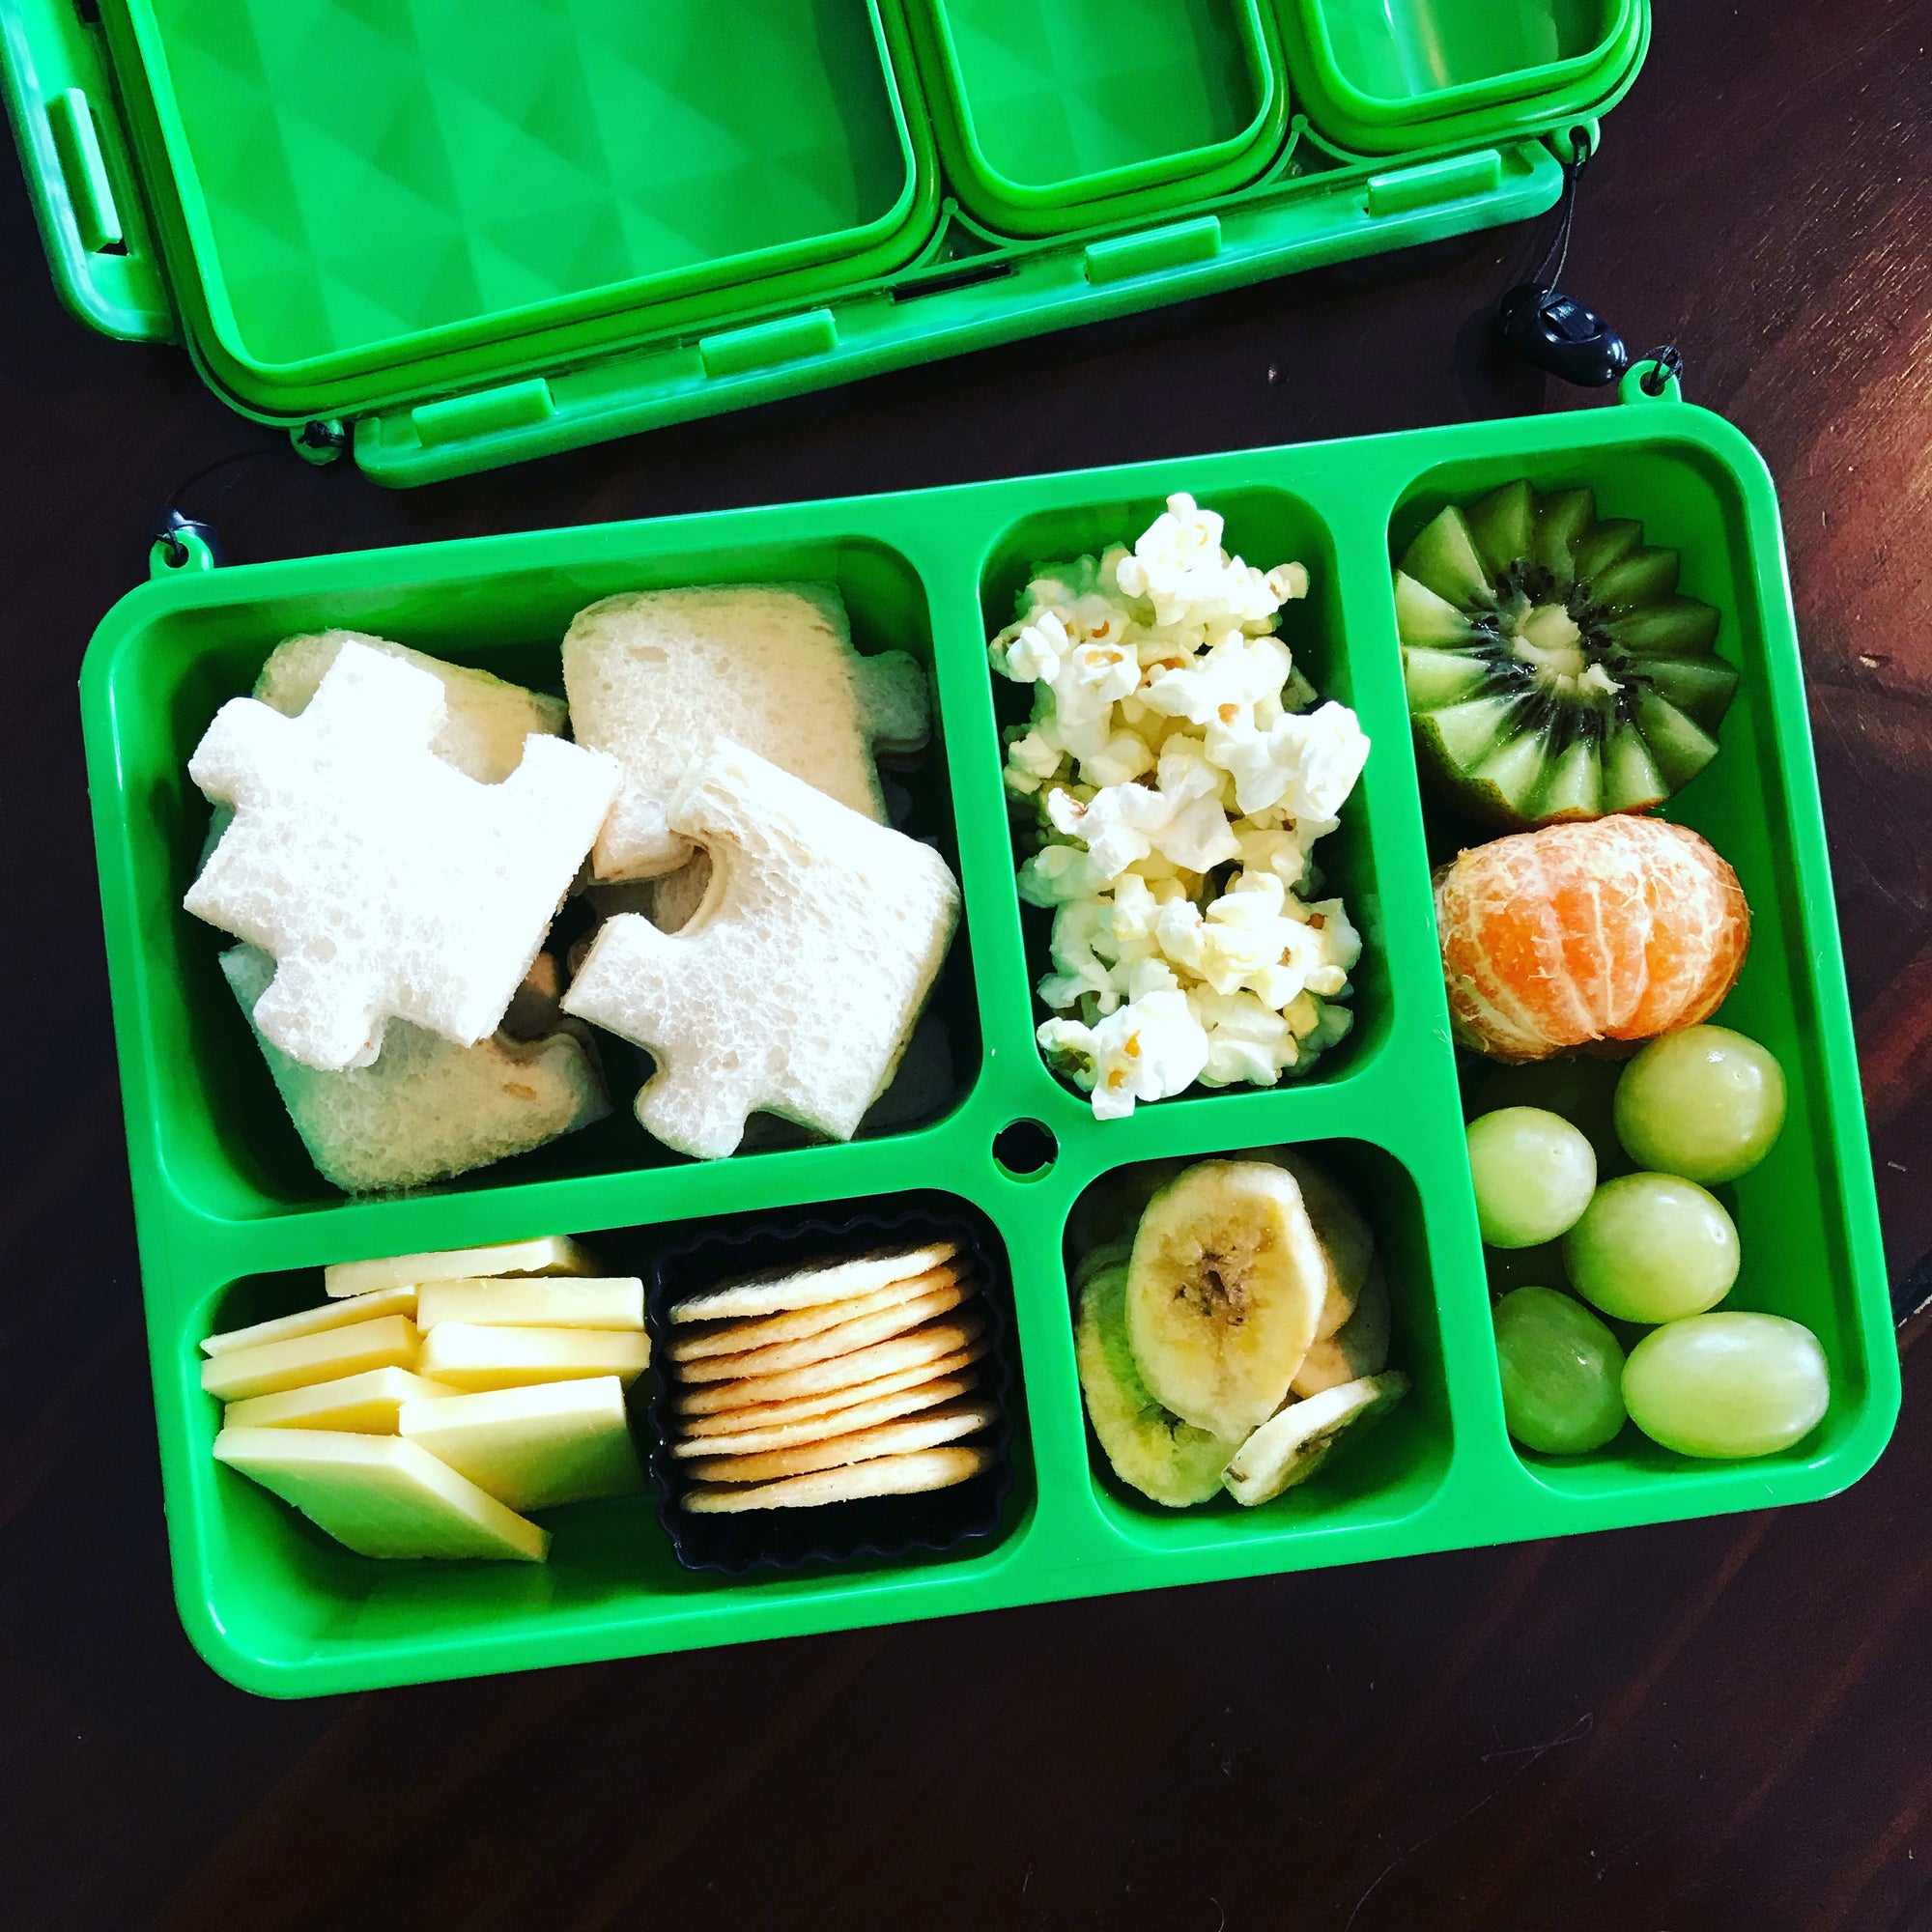 Go Green Lunch Box | SMALL - Blue - phunkyBento